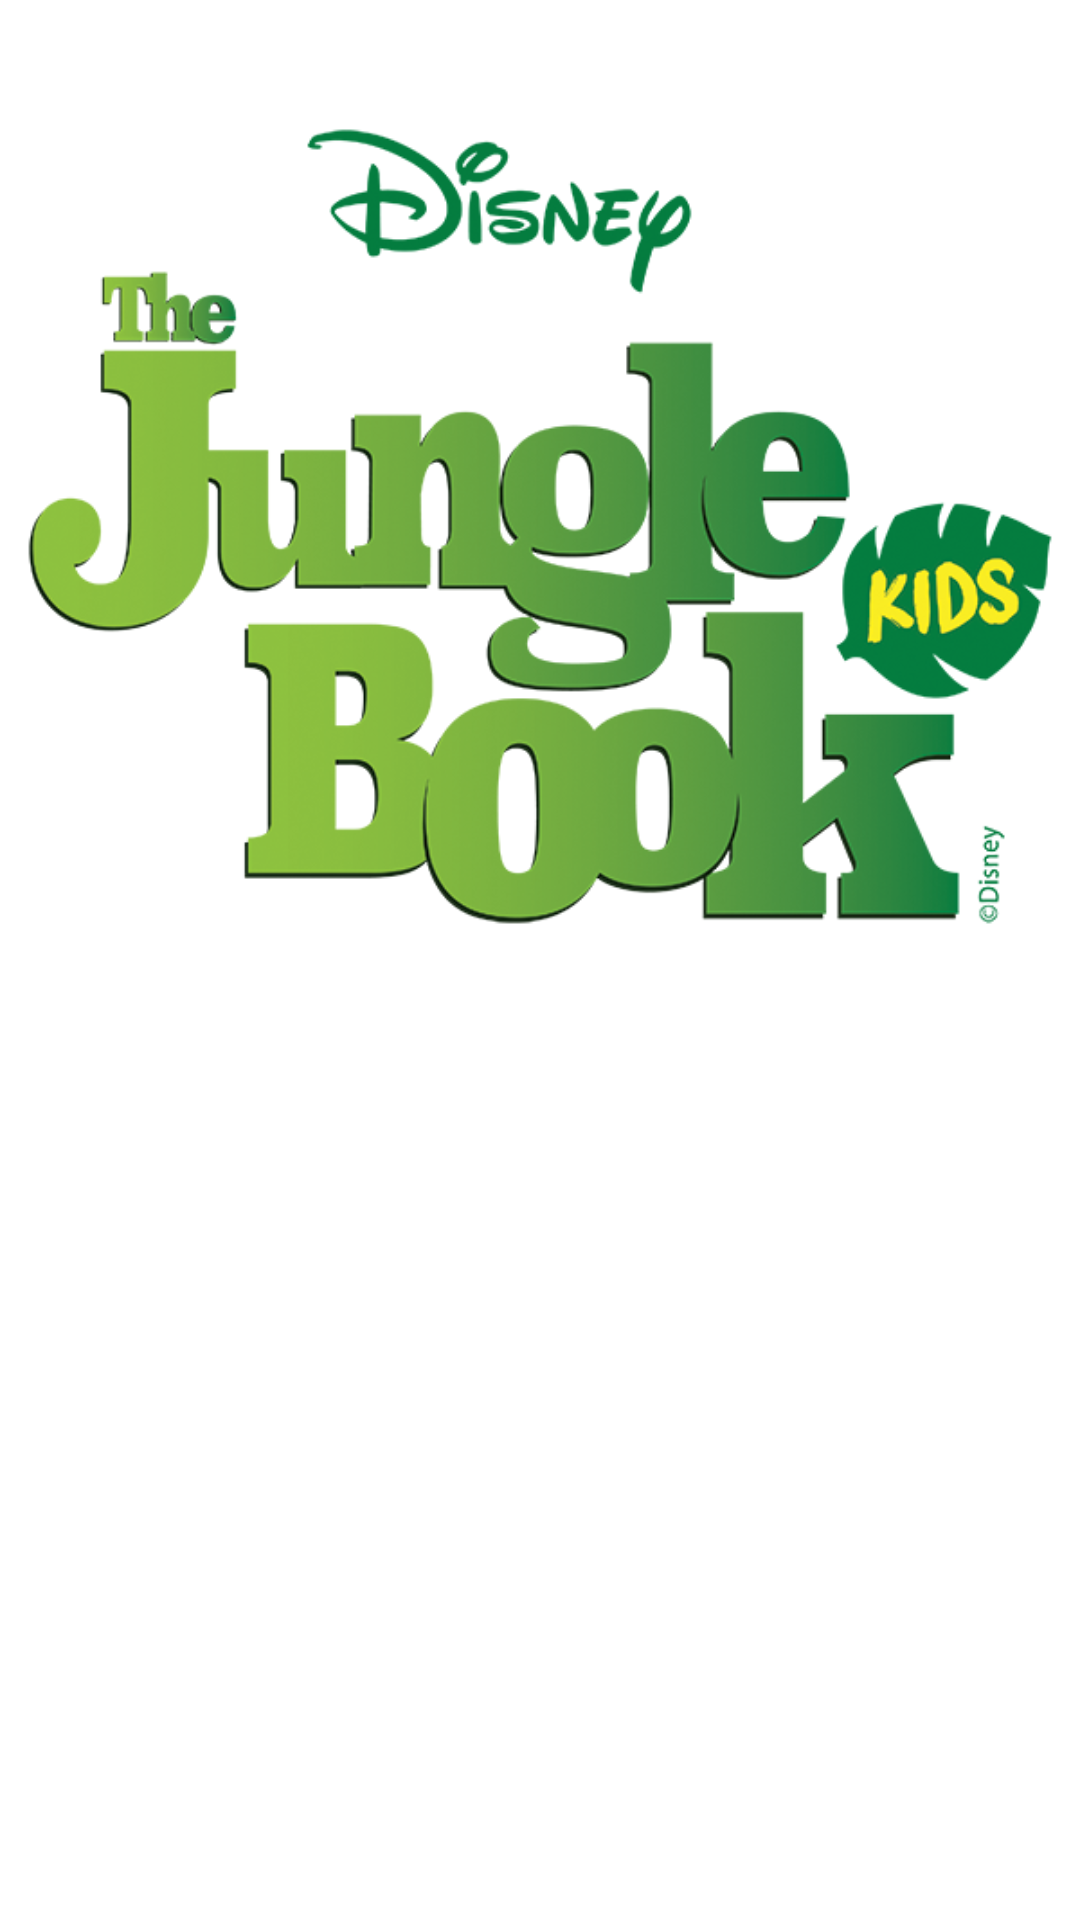 Image for Disney's The Jungle Book KIDS